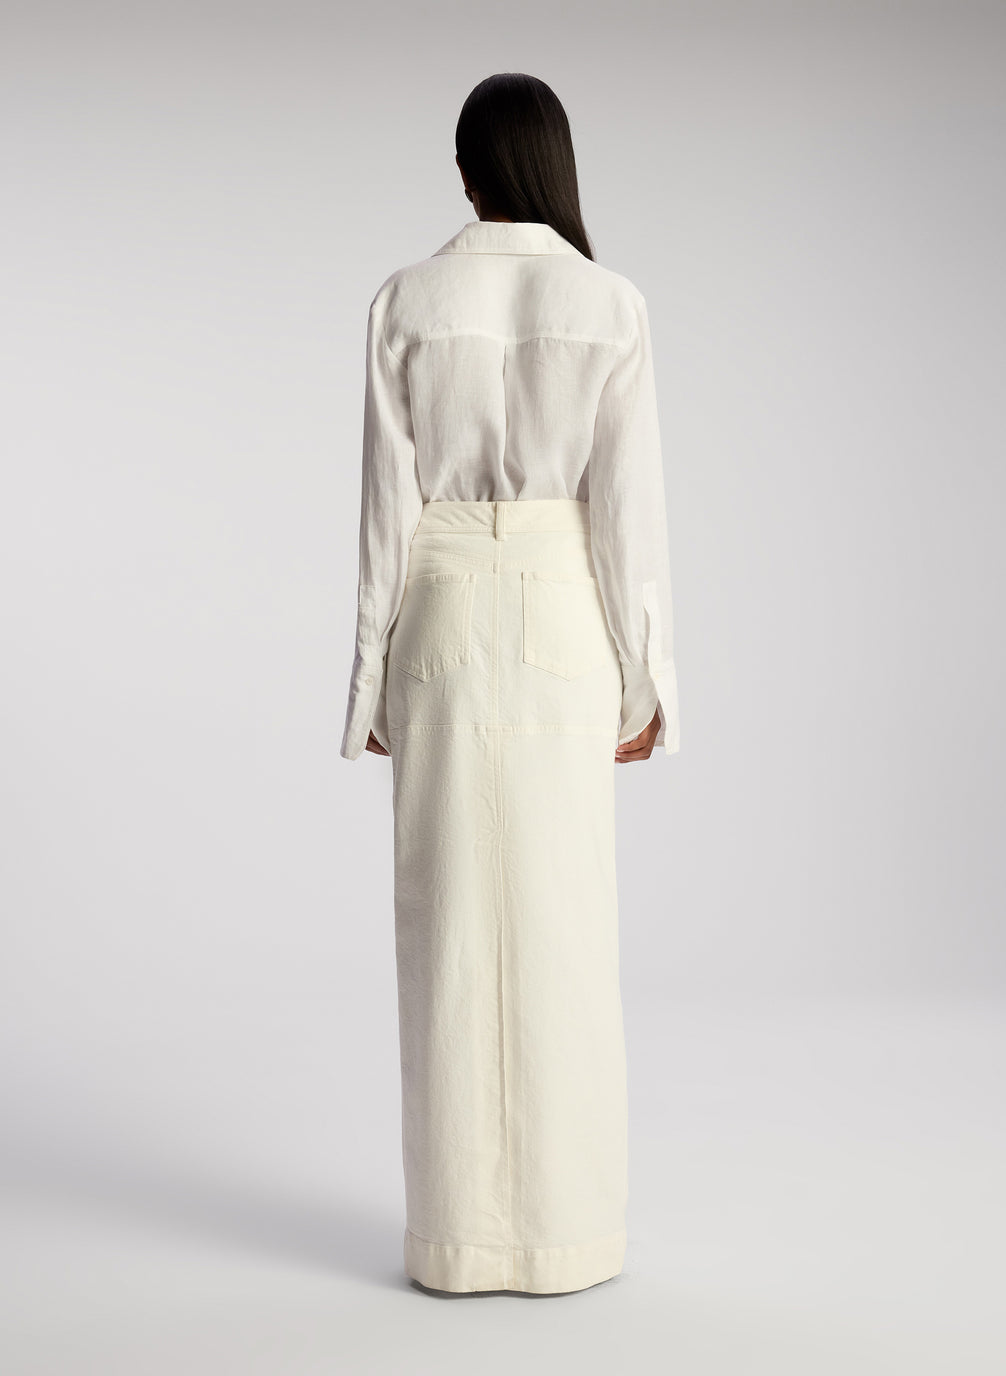 back view woman wearing white button down linen shirt and white maxi skirt